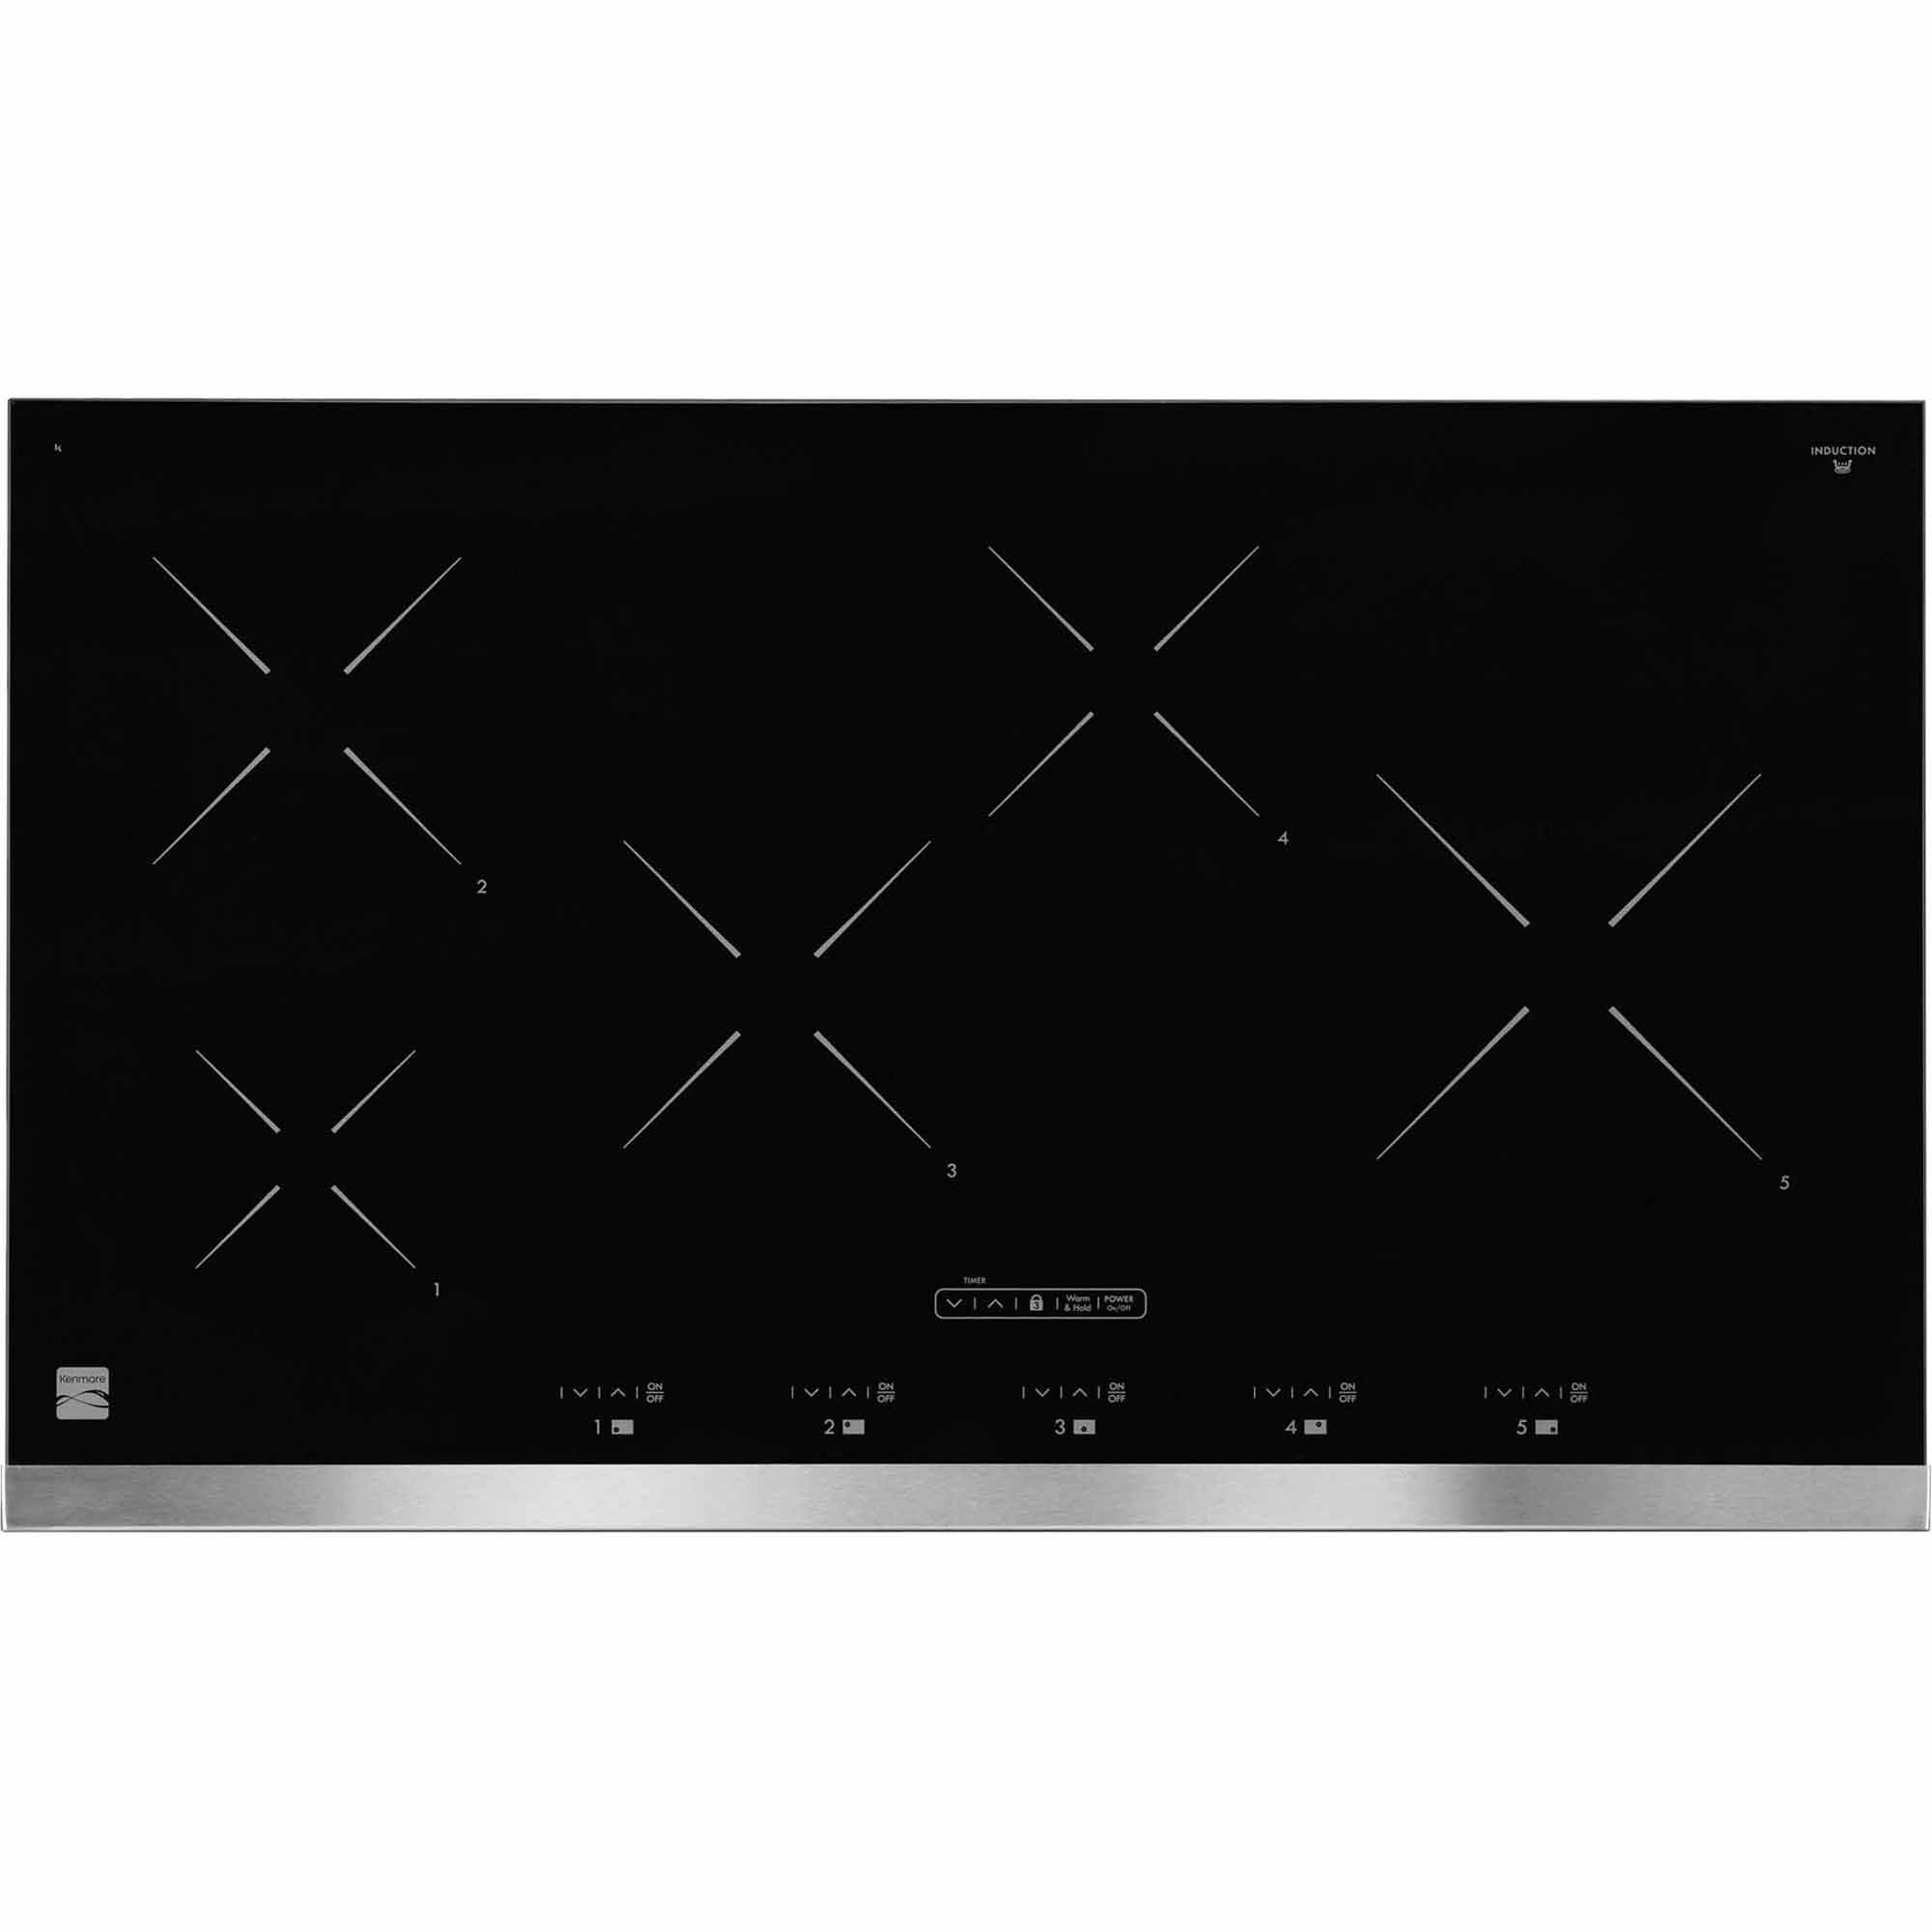 Kenmore 43900 36 Electric Induction Cooktop Stainless Steel w\/ Black